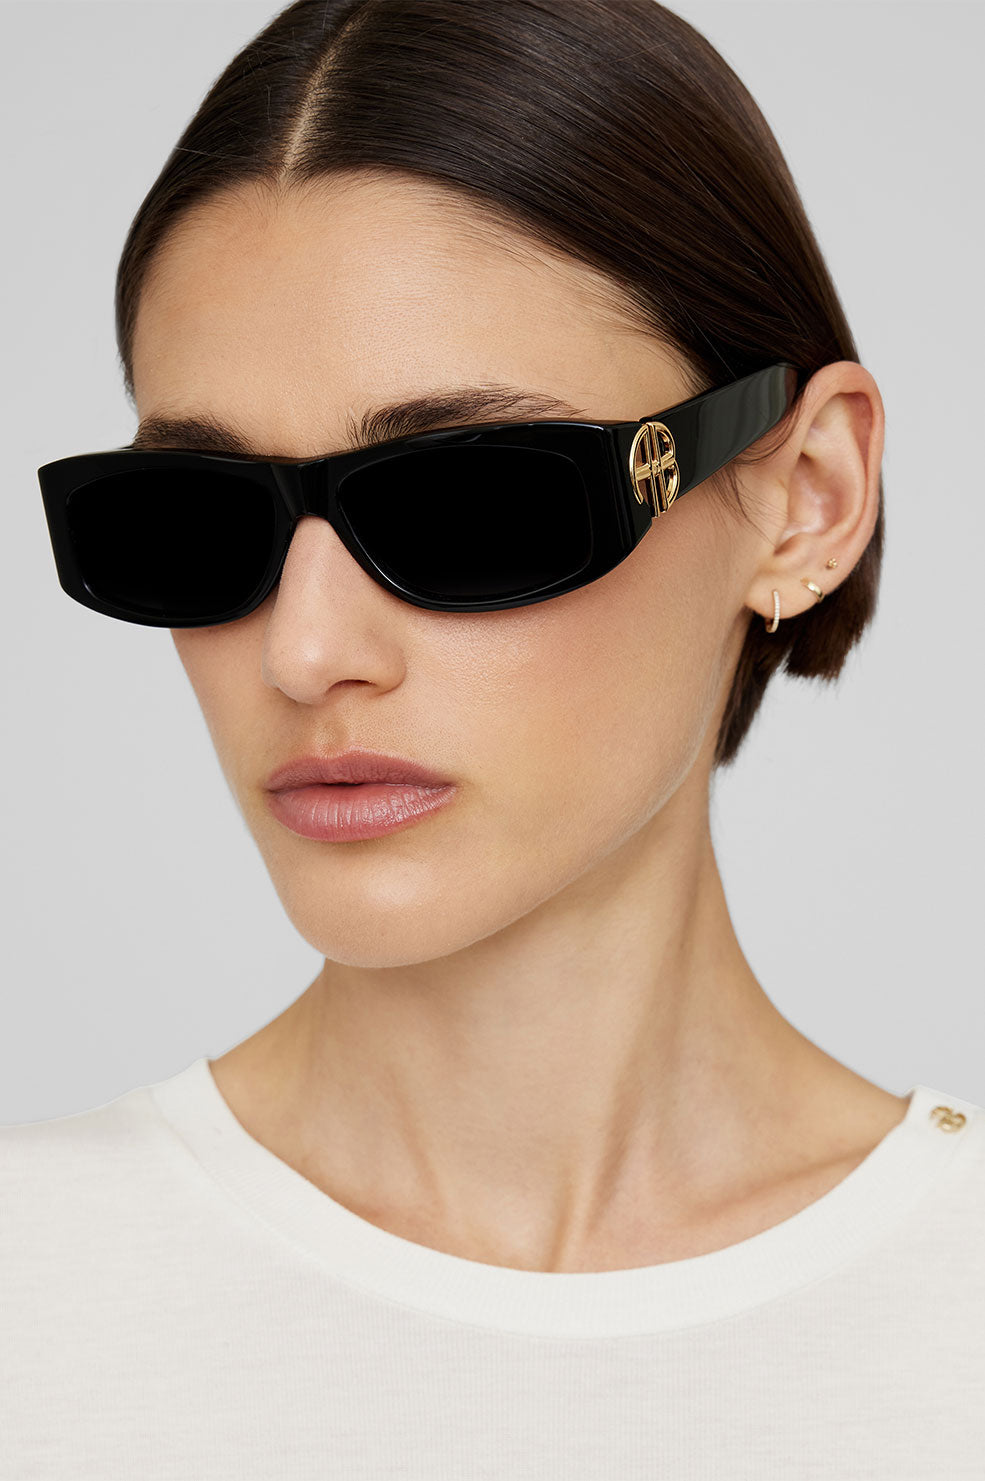 Siena Sunglasses - Black With Gold